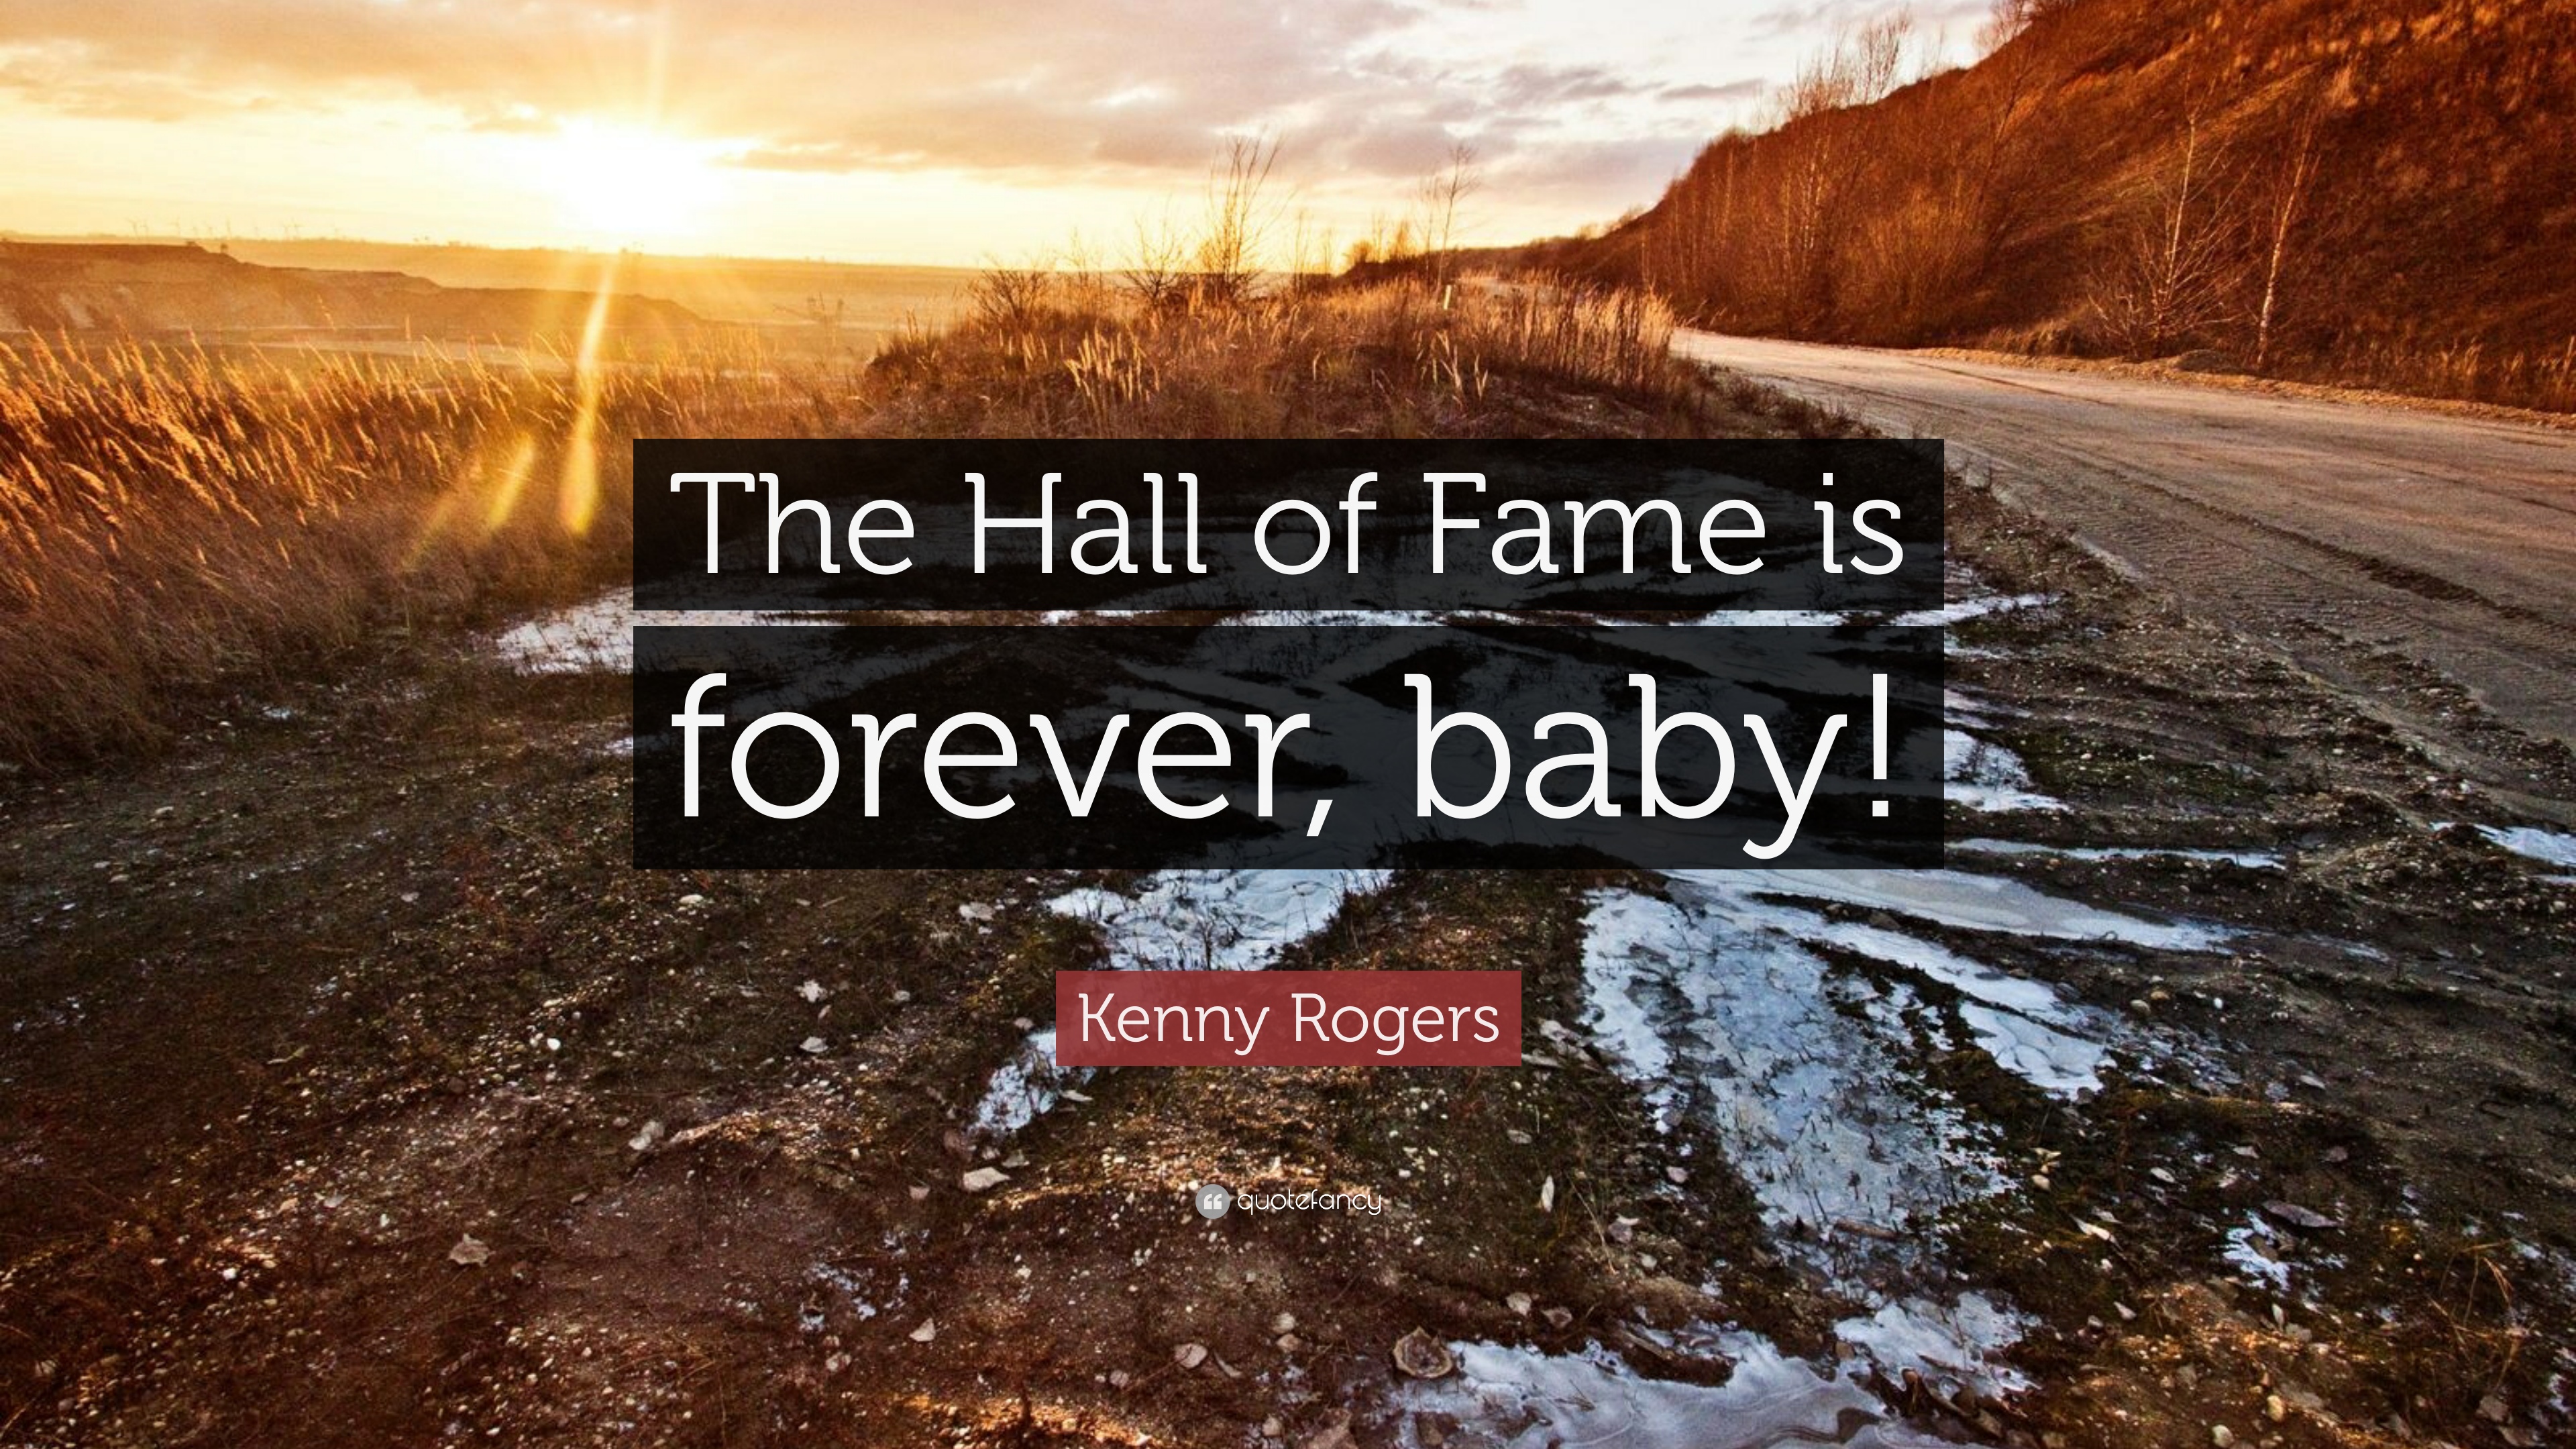 Kenny rogers quote âthe hall of fame is forever babyâ